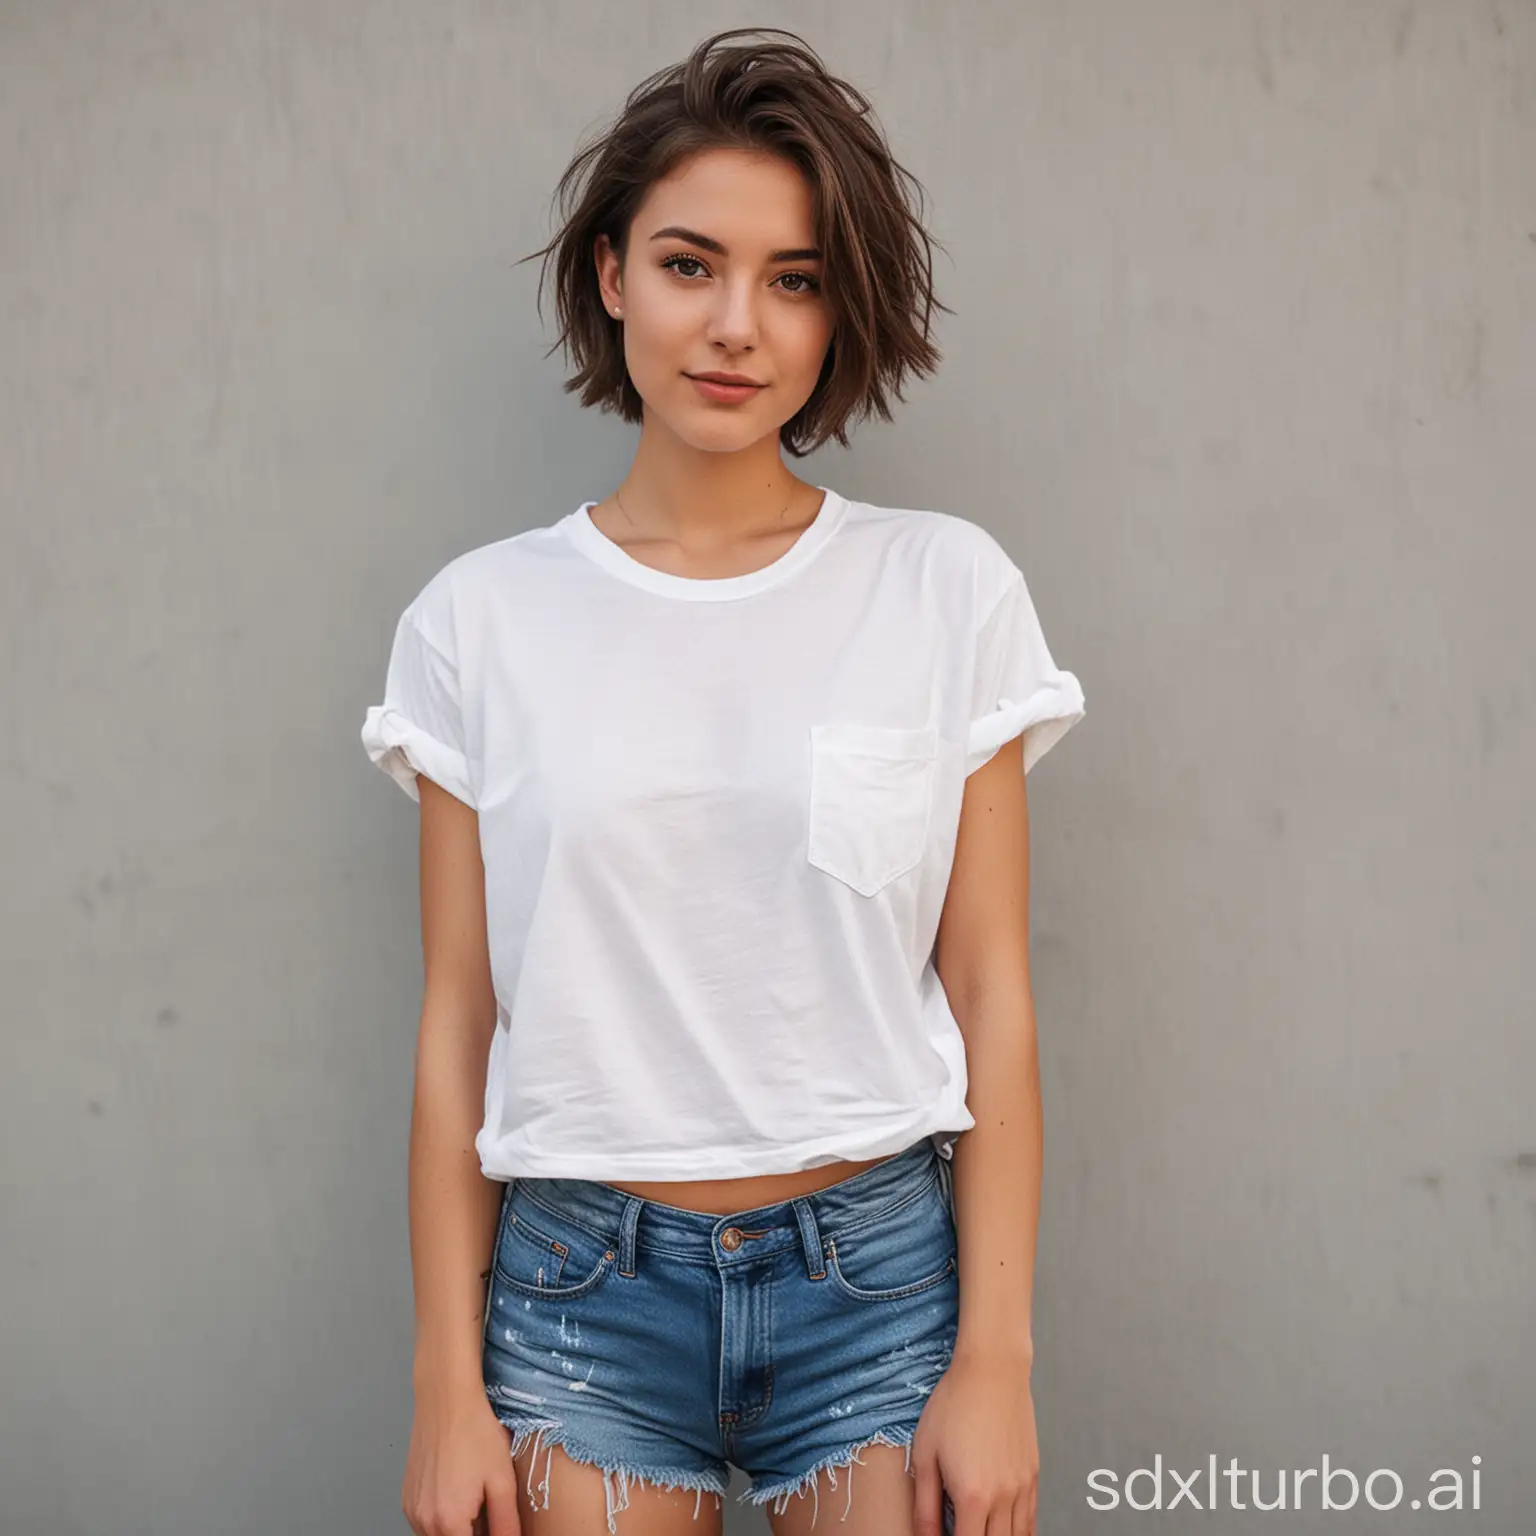 Girl with a white T-shirt, denim pants, and short hair